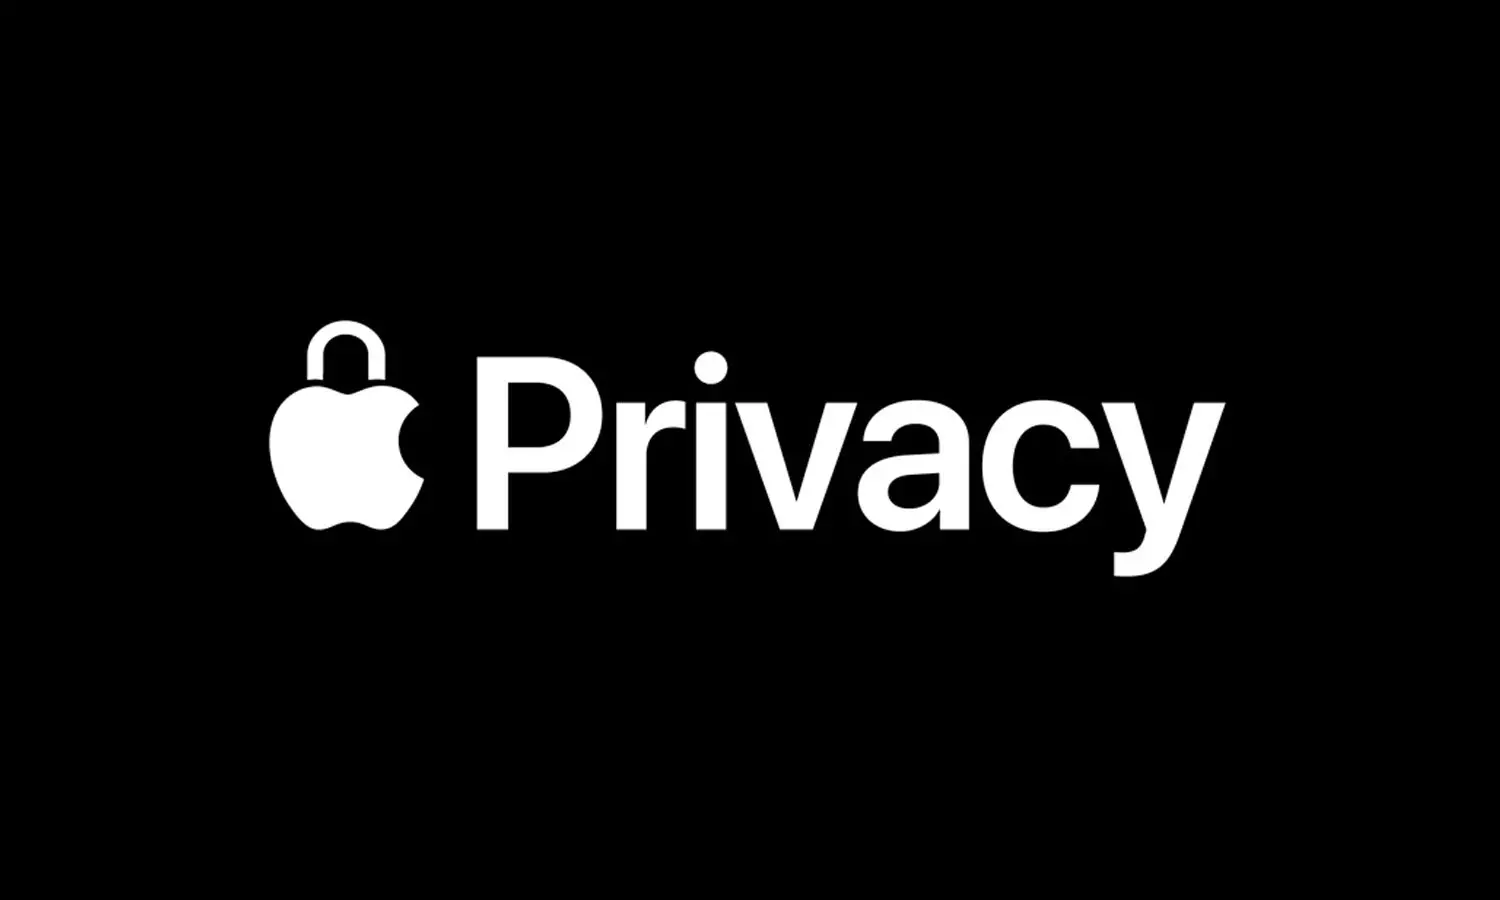 Apples privacy update: an Indian antitrust perspective